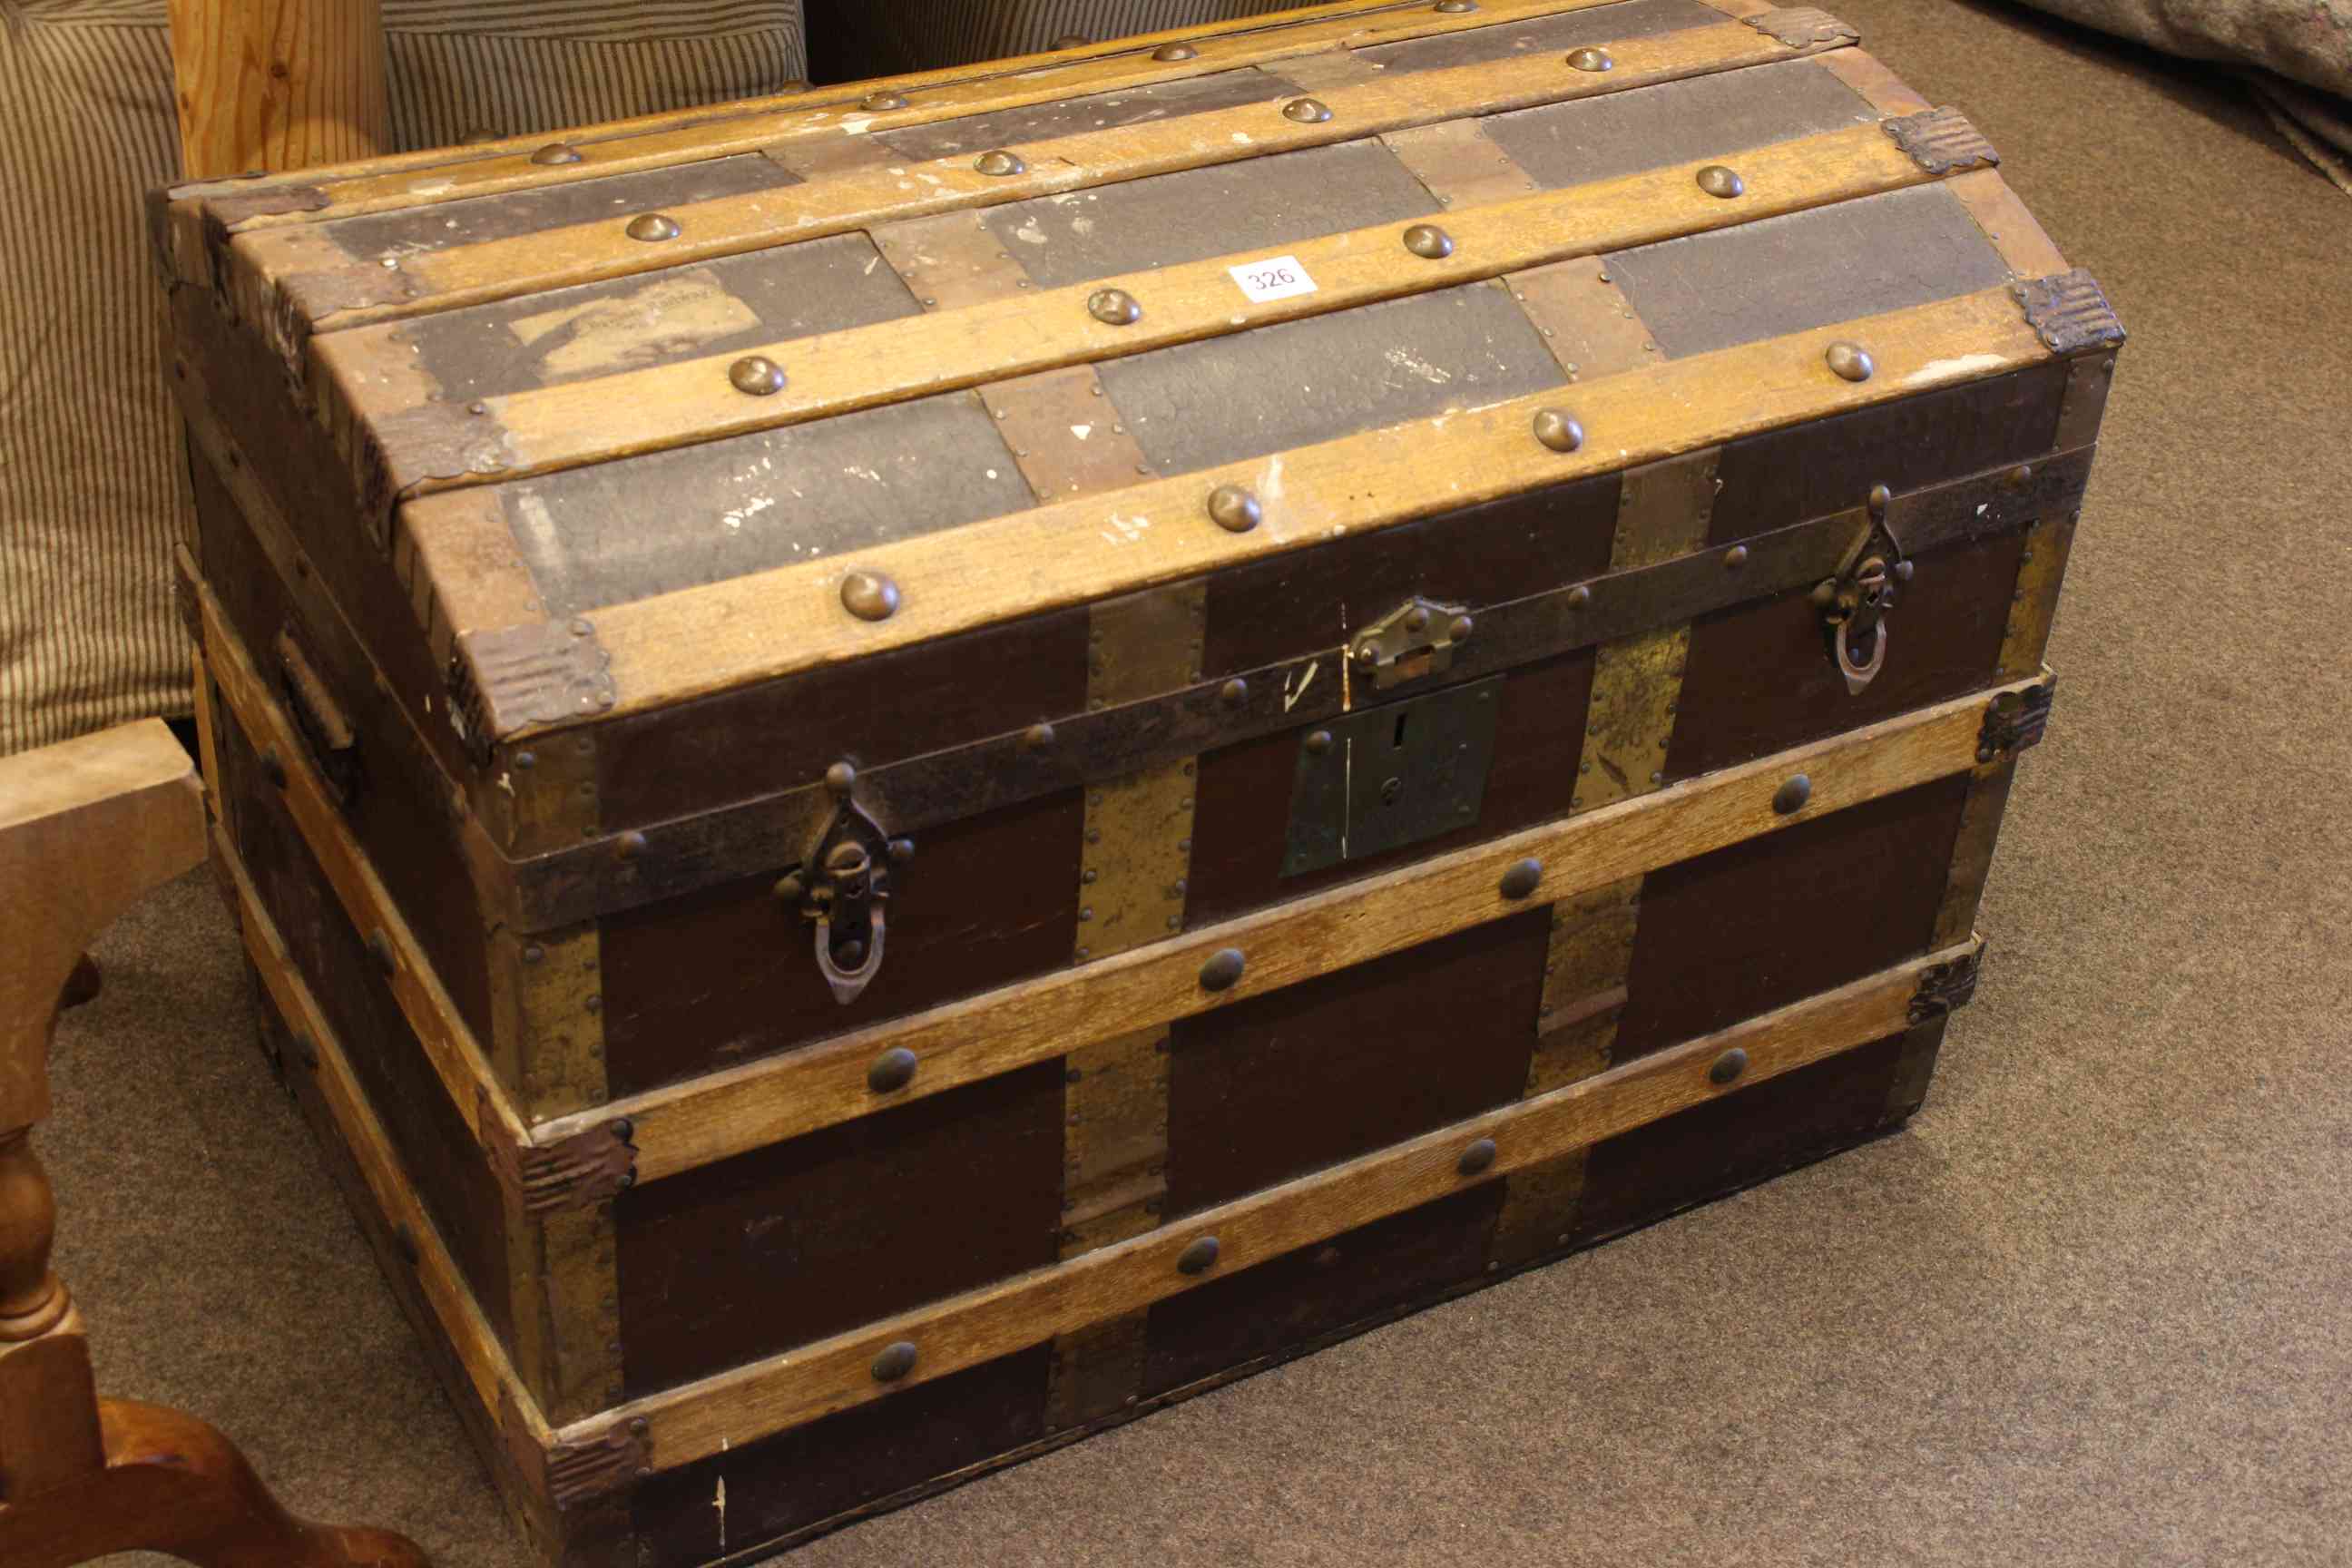 Vintage wood bound dome trunk, 54cm high by 76cm wide by 45cm deep.